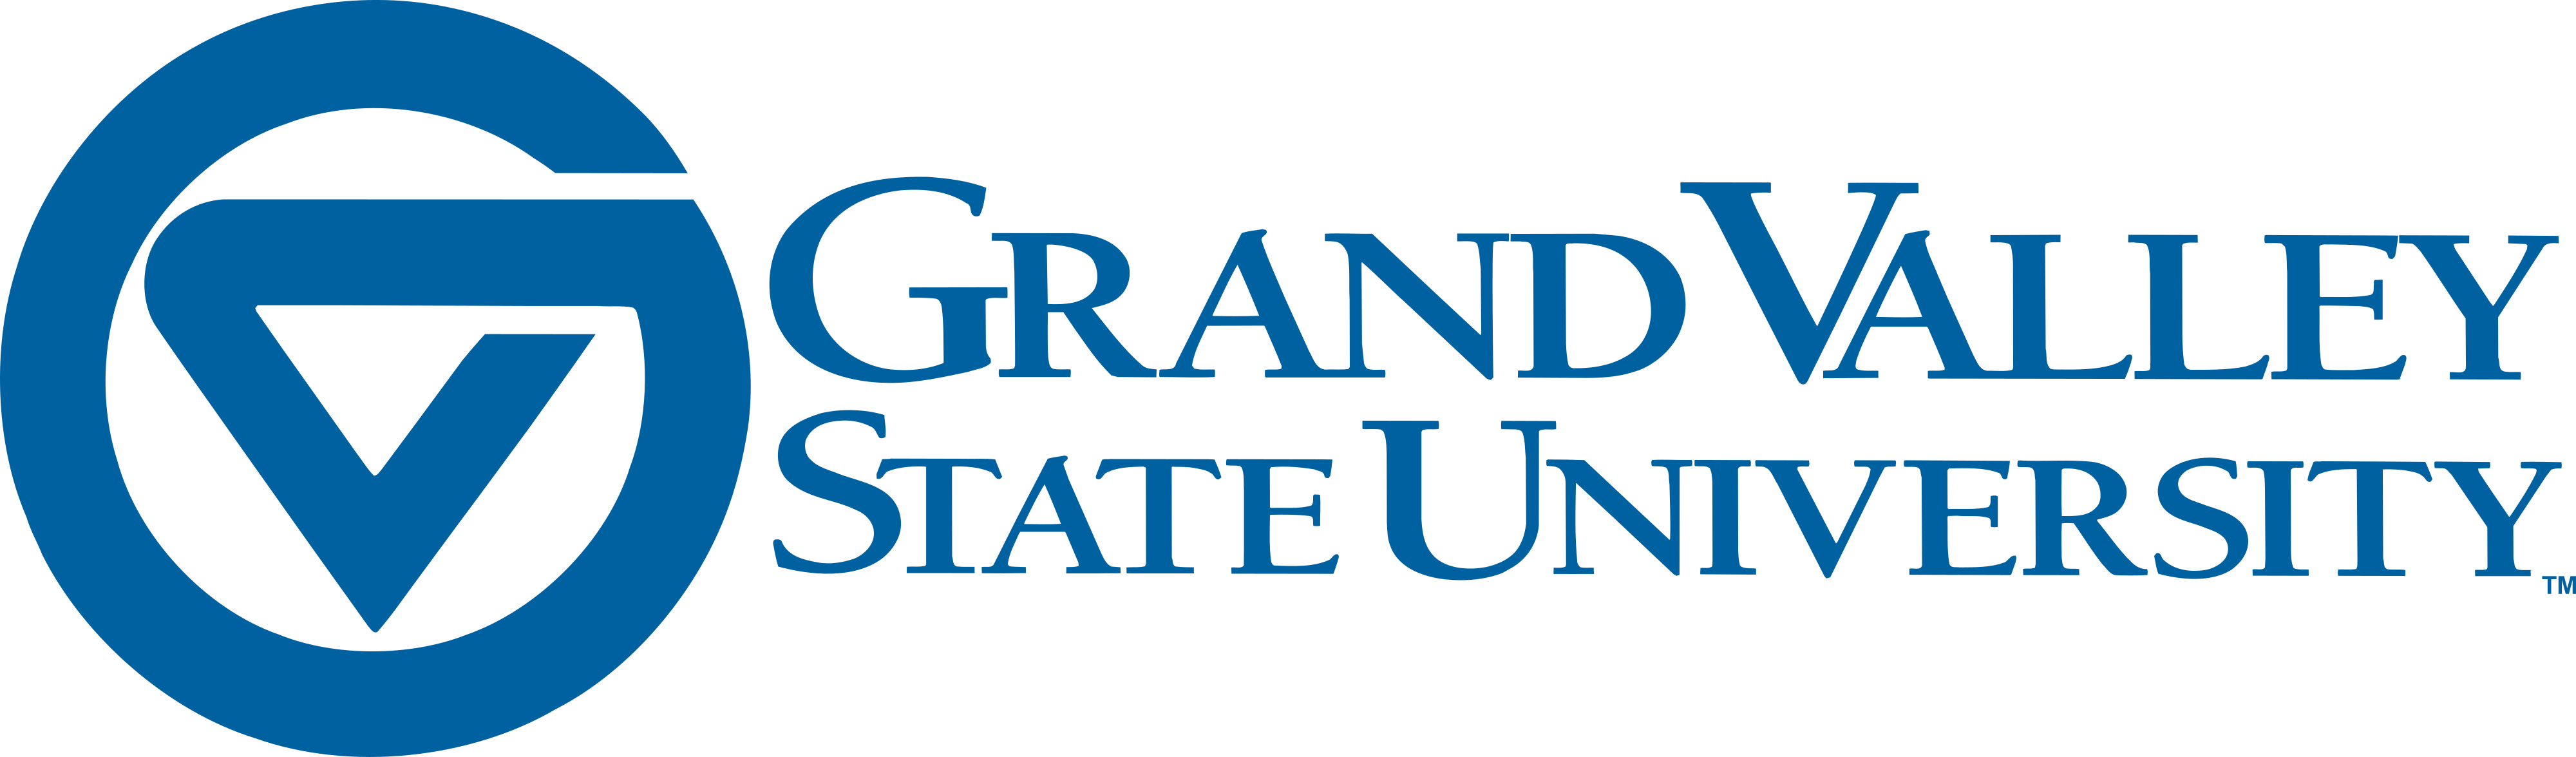 Grand Valley State University logo download.